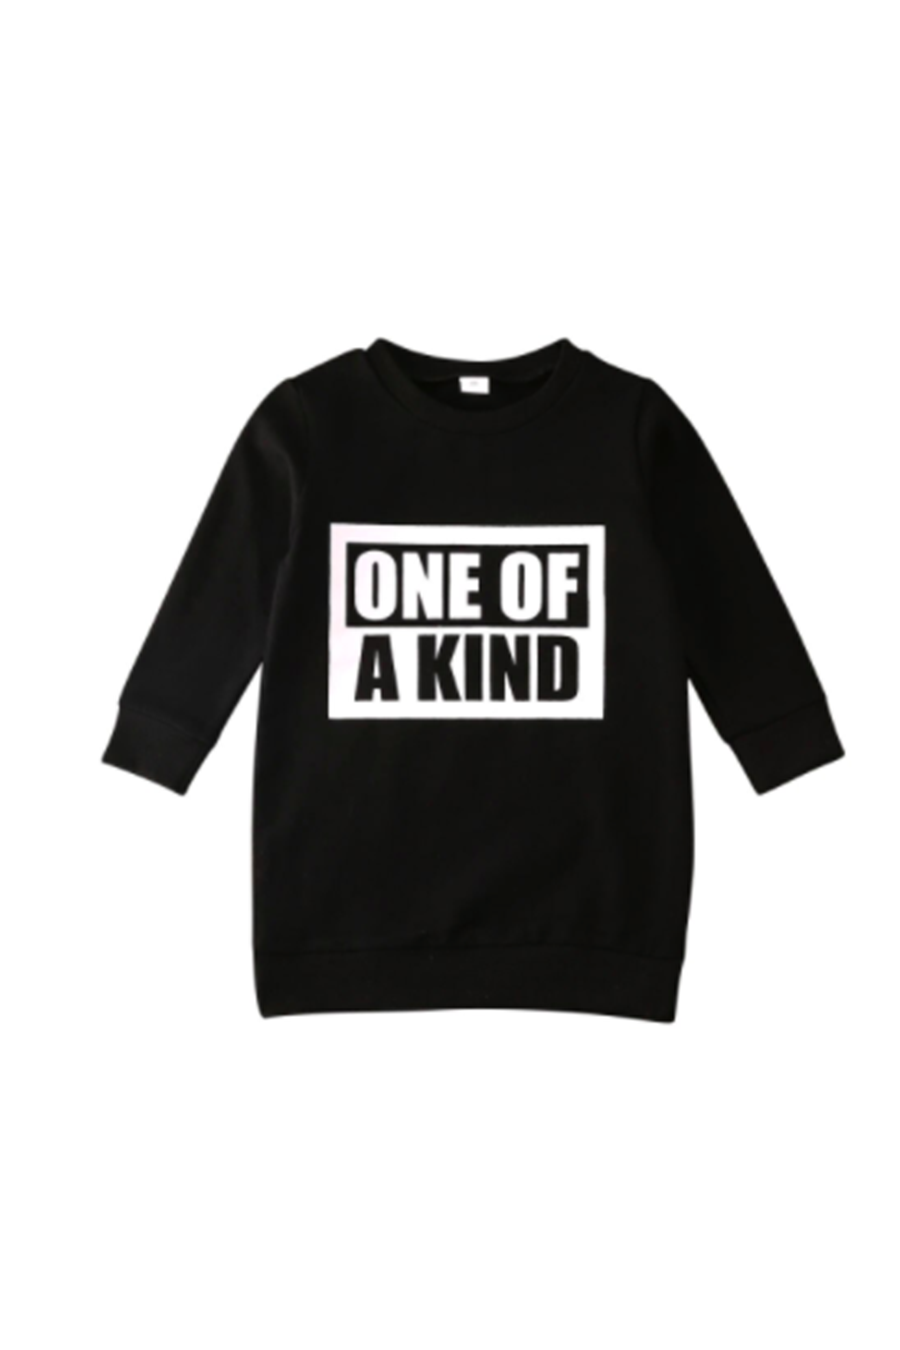 One Of A Kind Pullover Tunic | Black - Main Image Number 1 of 1